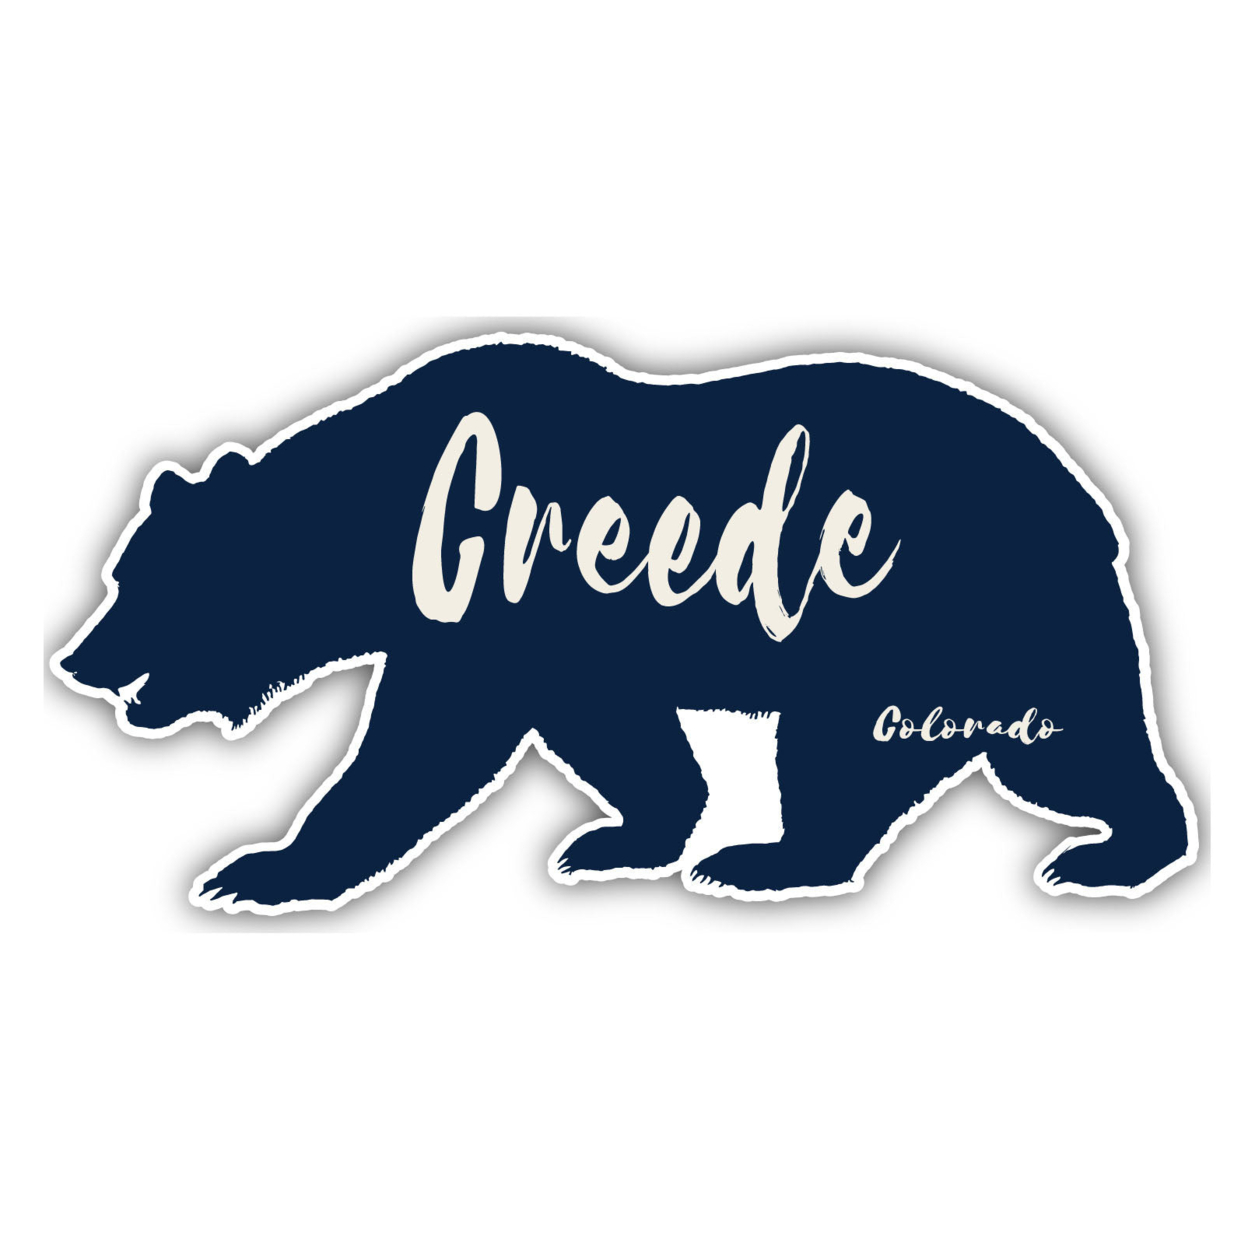 Creede Colorado Souvenir Decorative Stickers (Choose Theme And Size) - 4-Pack, 8-Inch, Camp Life